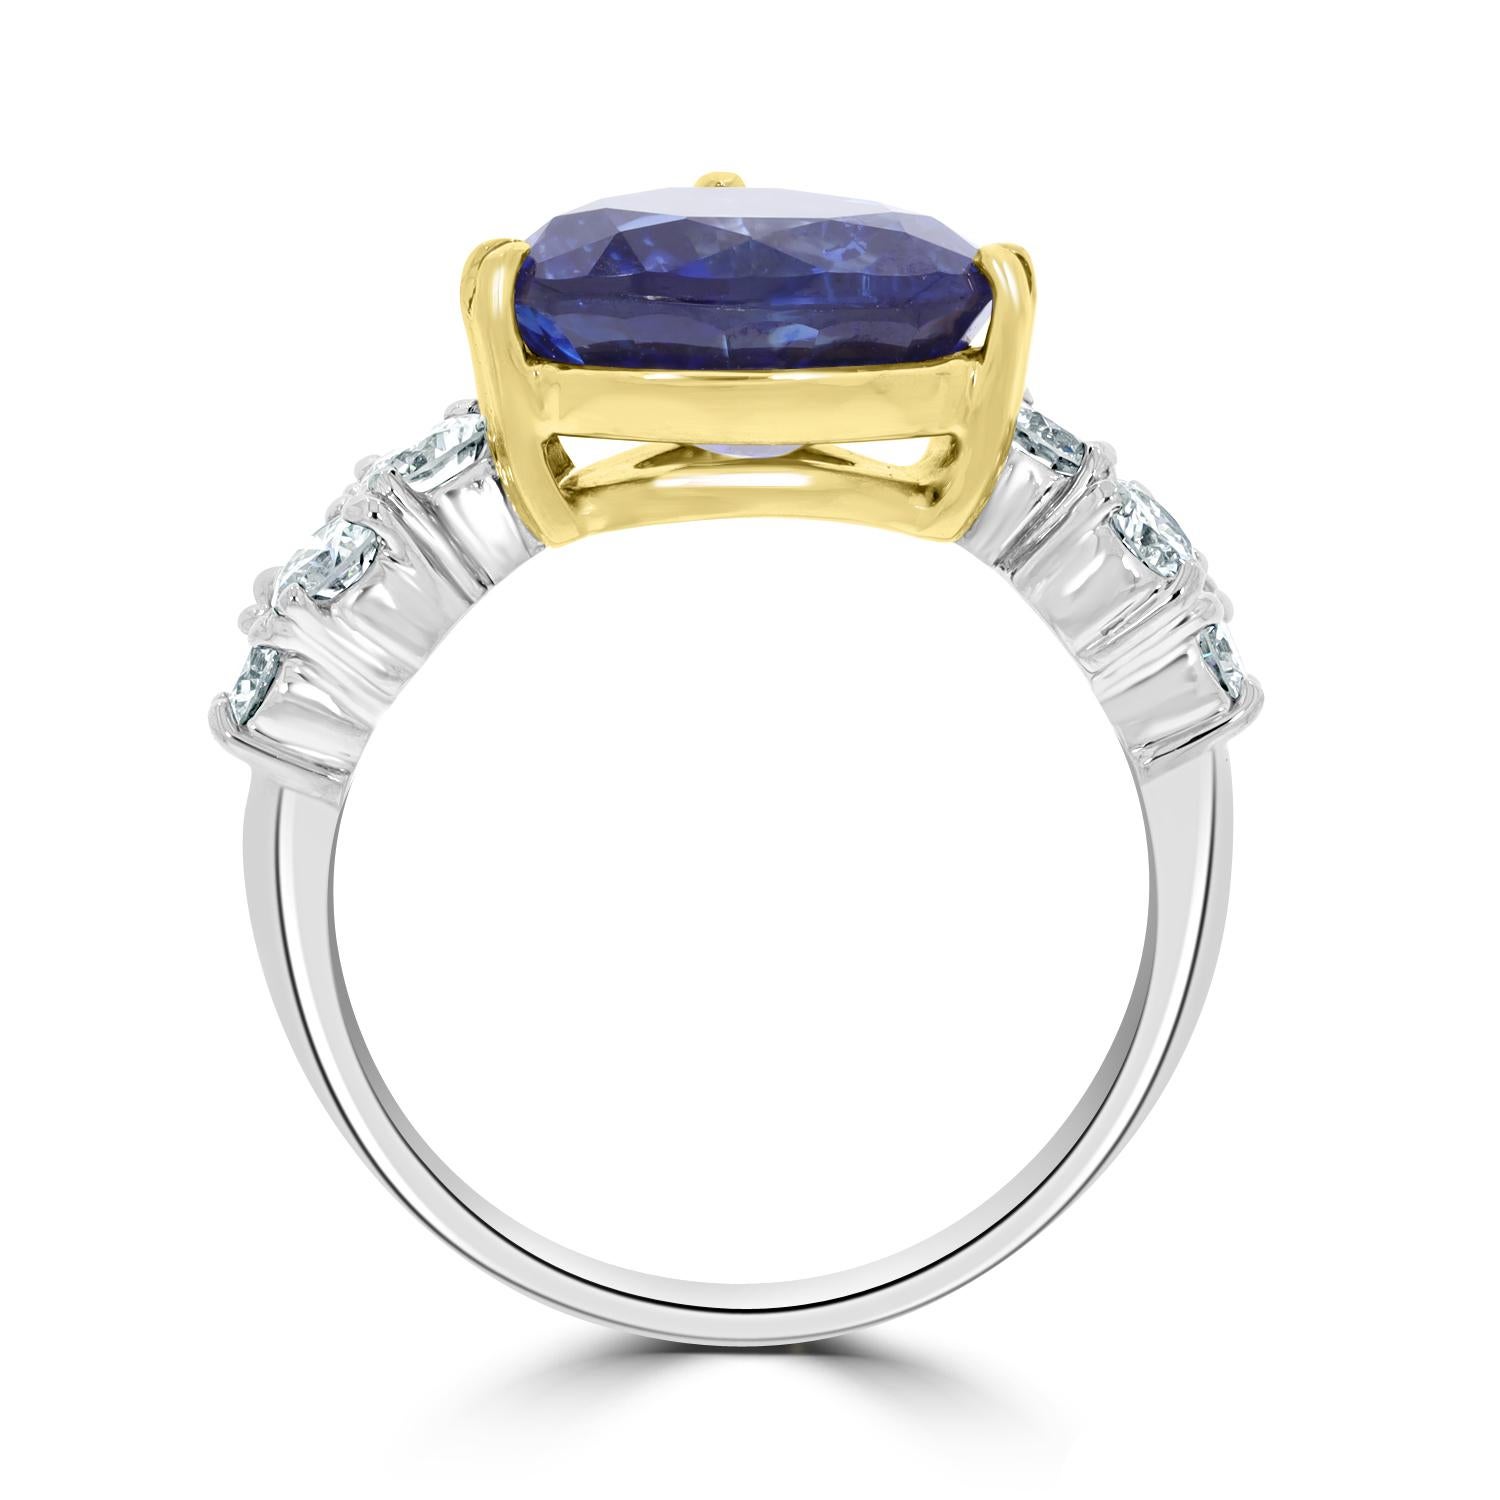 The platinum/18K is used to craft this fabulous ring gives it a fantastic shine that will last for generations. Flaunting a zesty sapphire in a pear cut, this radiant ring matches your vibrant personality with flair while the gorgeous mix diamonds